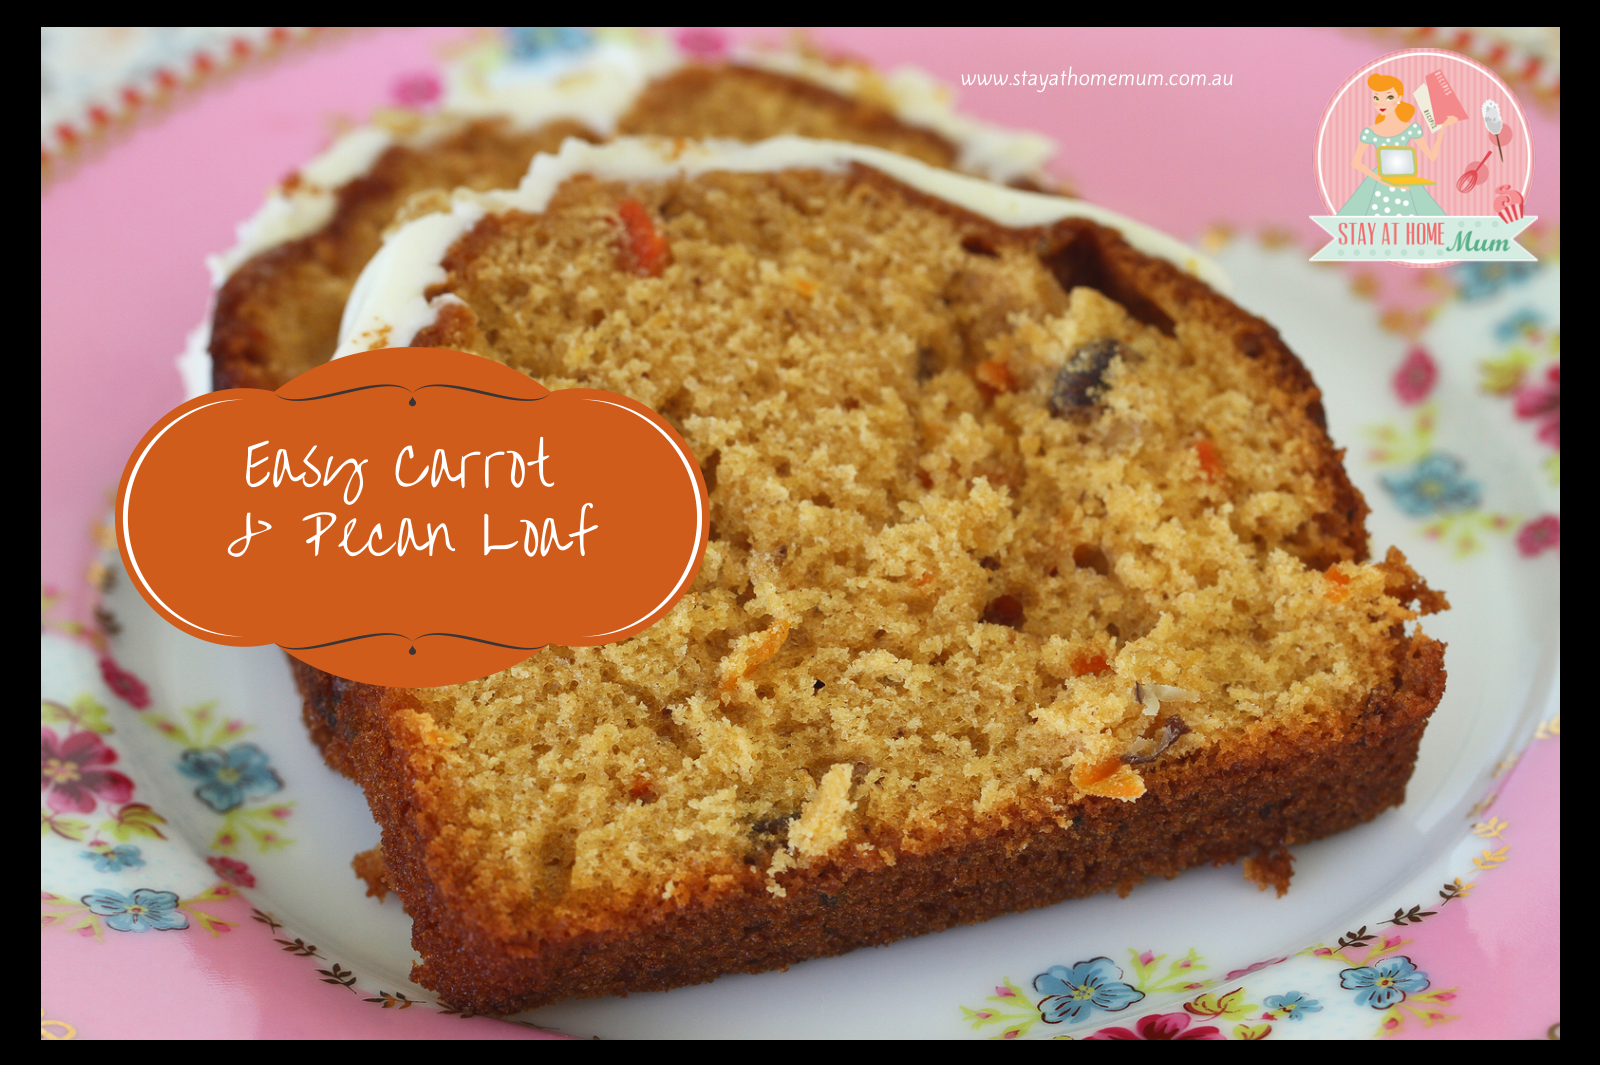 Easy Carrot and Pecan Loaf